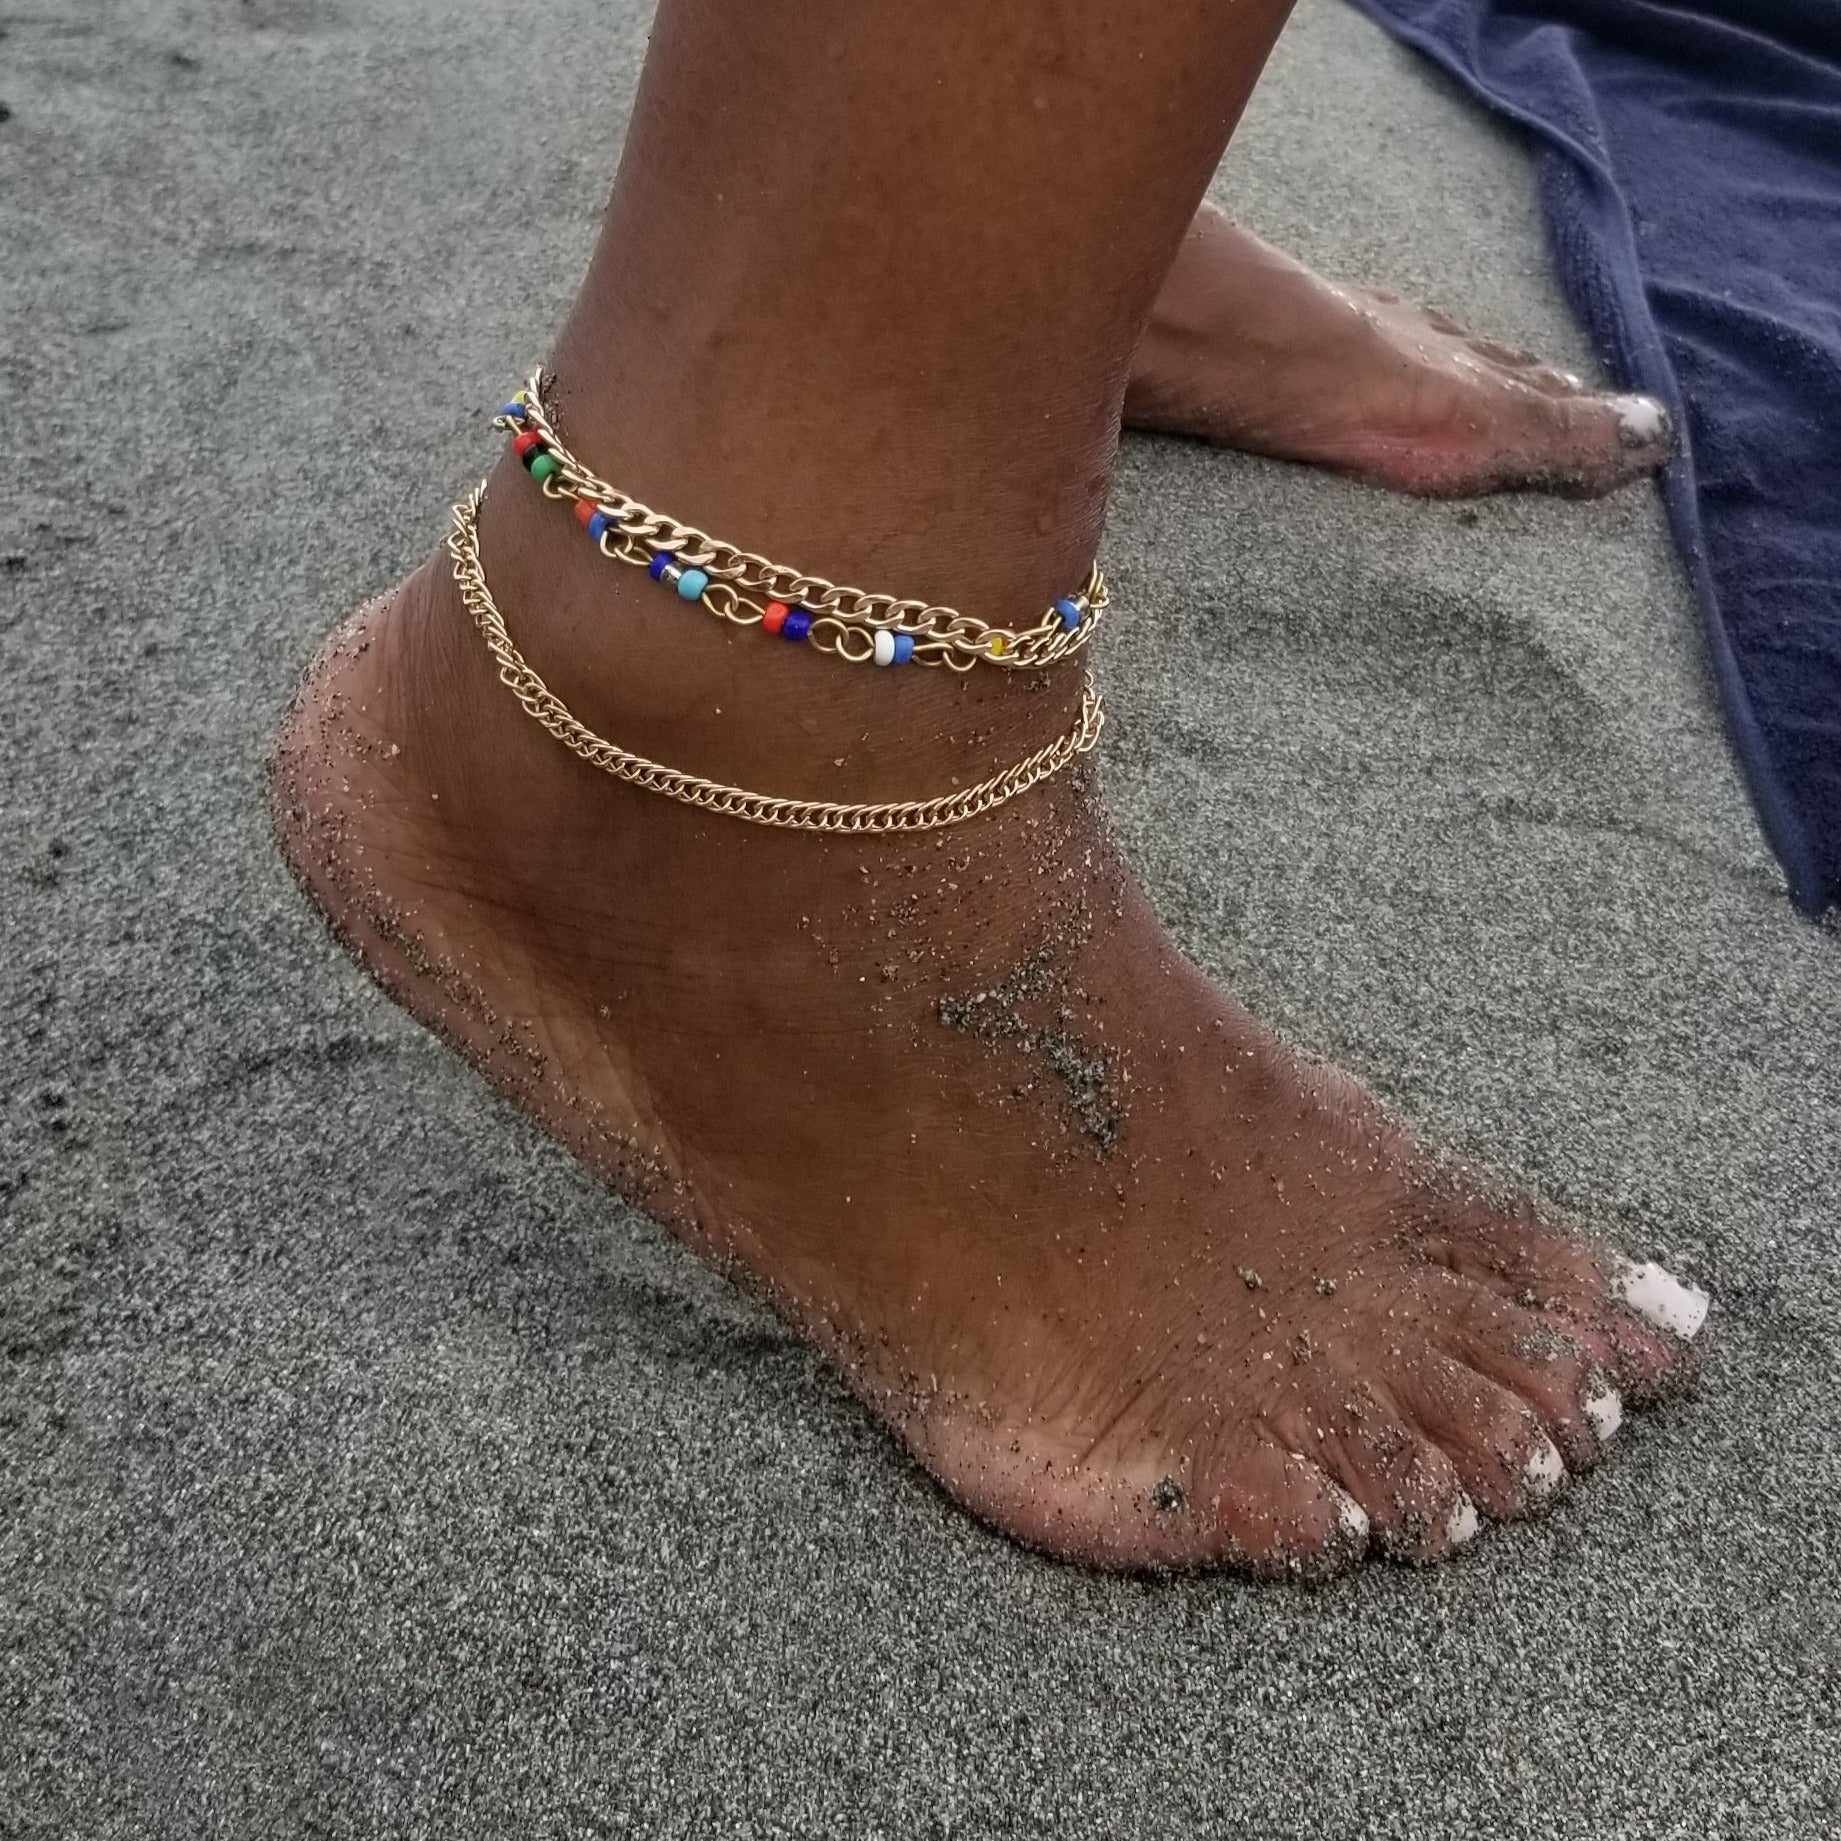 Wholesale African Boho Beach Jewelry Handmade Colorful Flower Charms Ankle  Bracelet Foot Slave Chain Rice Seed Beaded Bohemian Anklets From  malibabacom